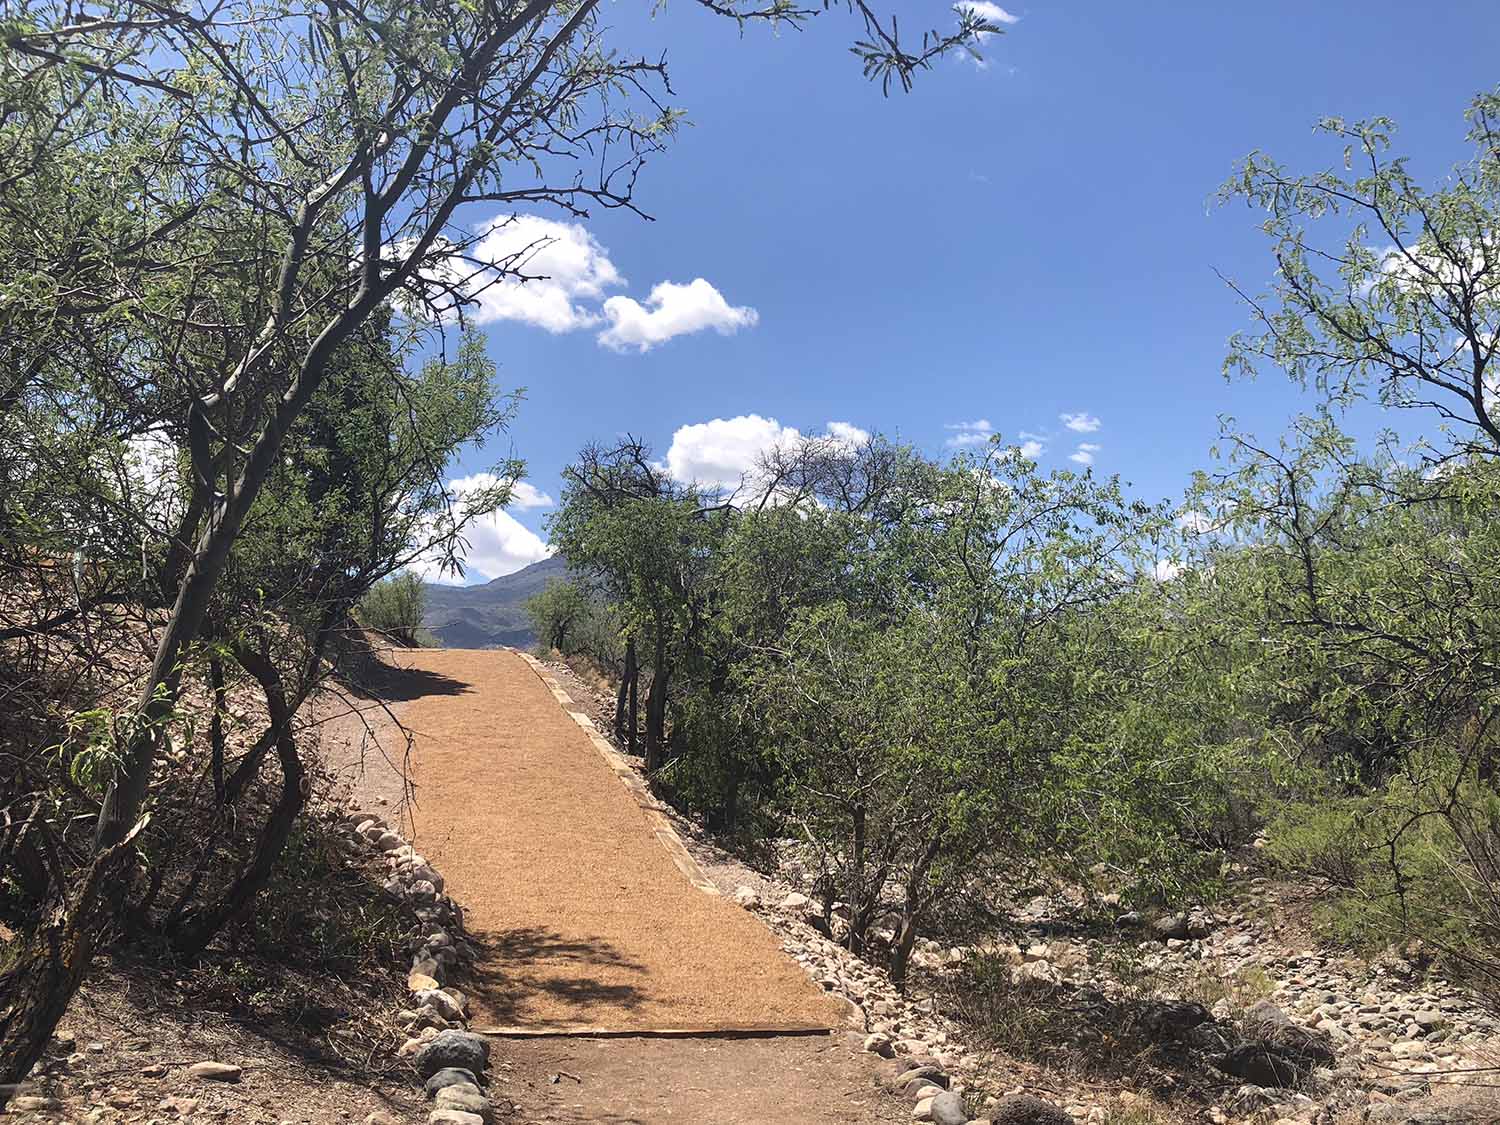 The Mescal Wash Trail